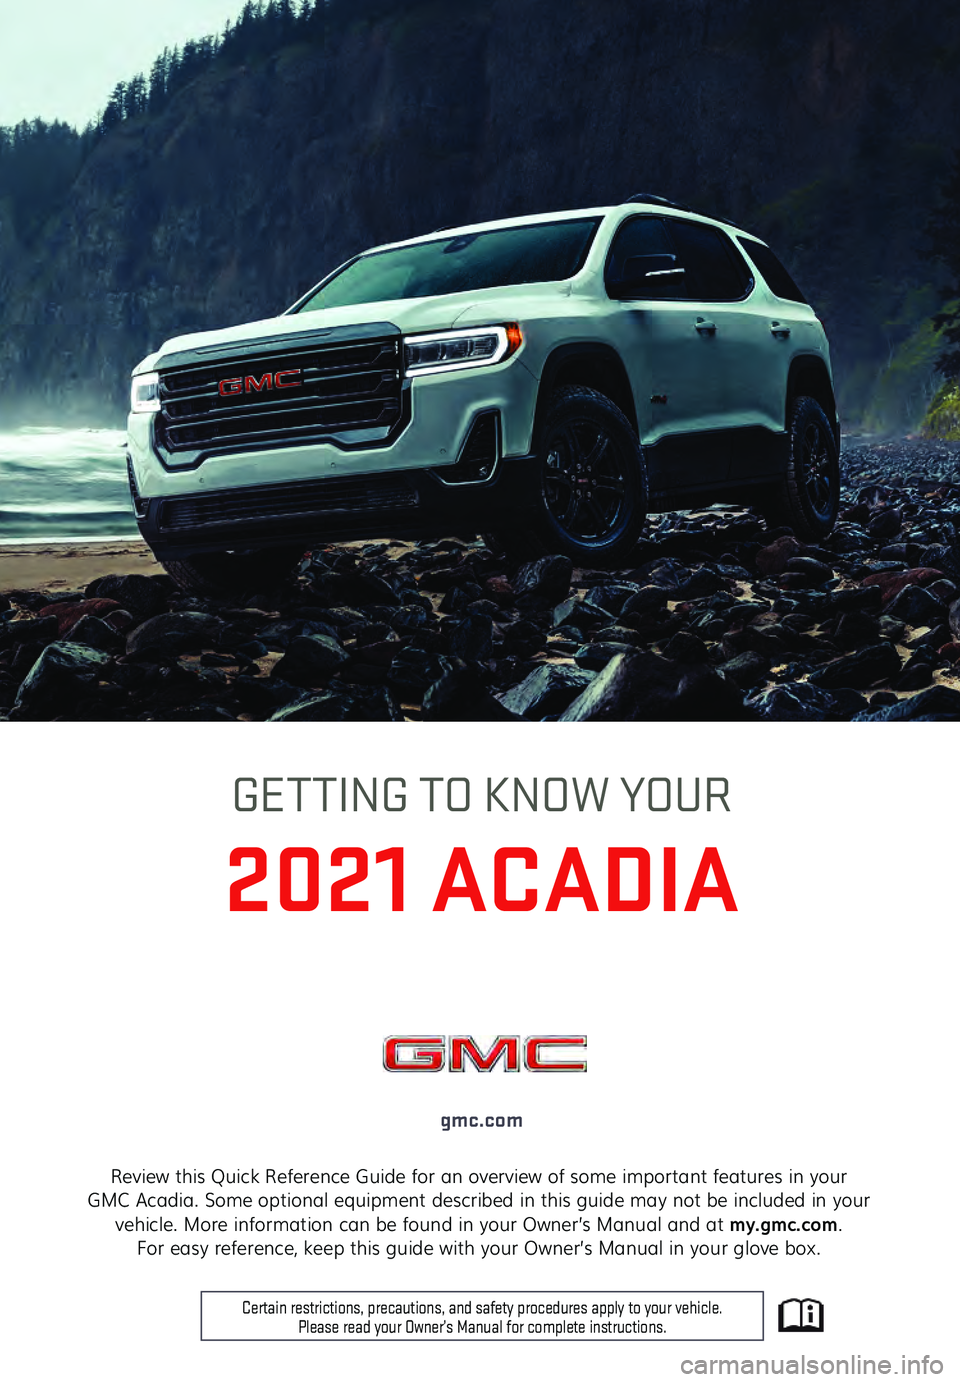 GMC ACADIA 2021  Get To Know Guide 